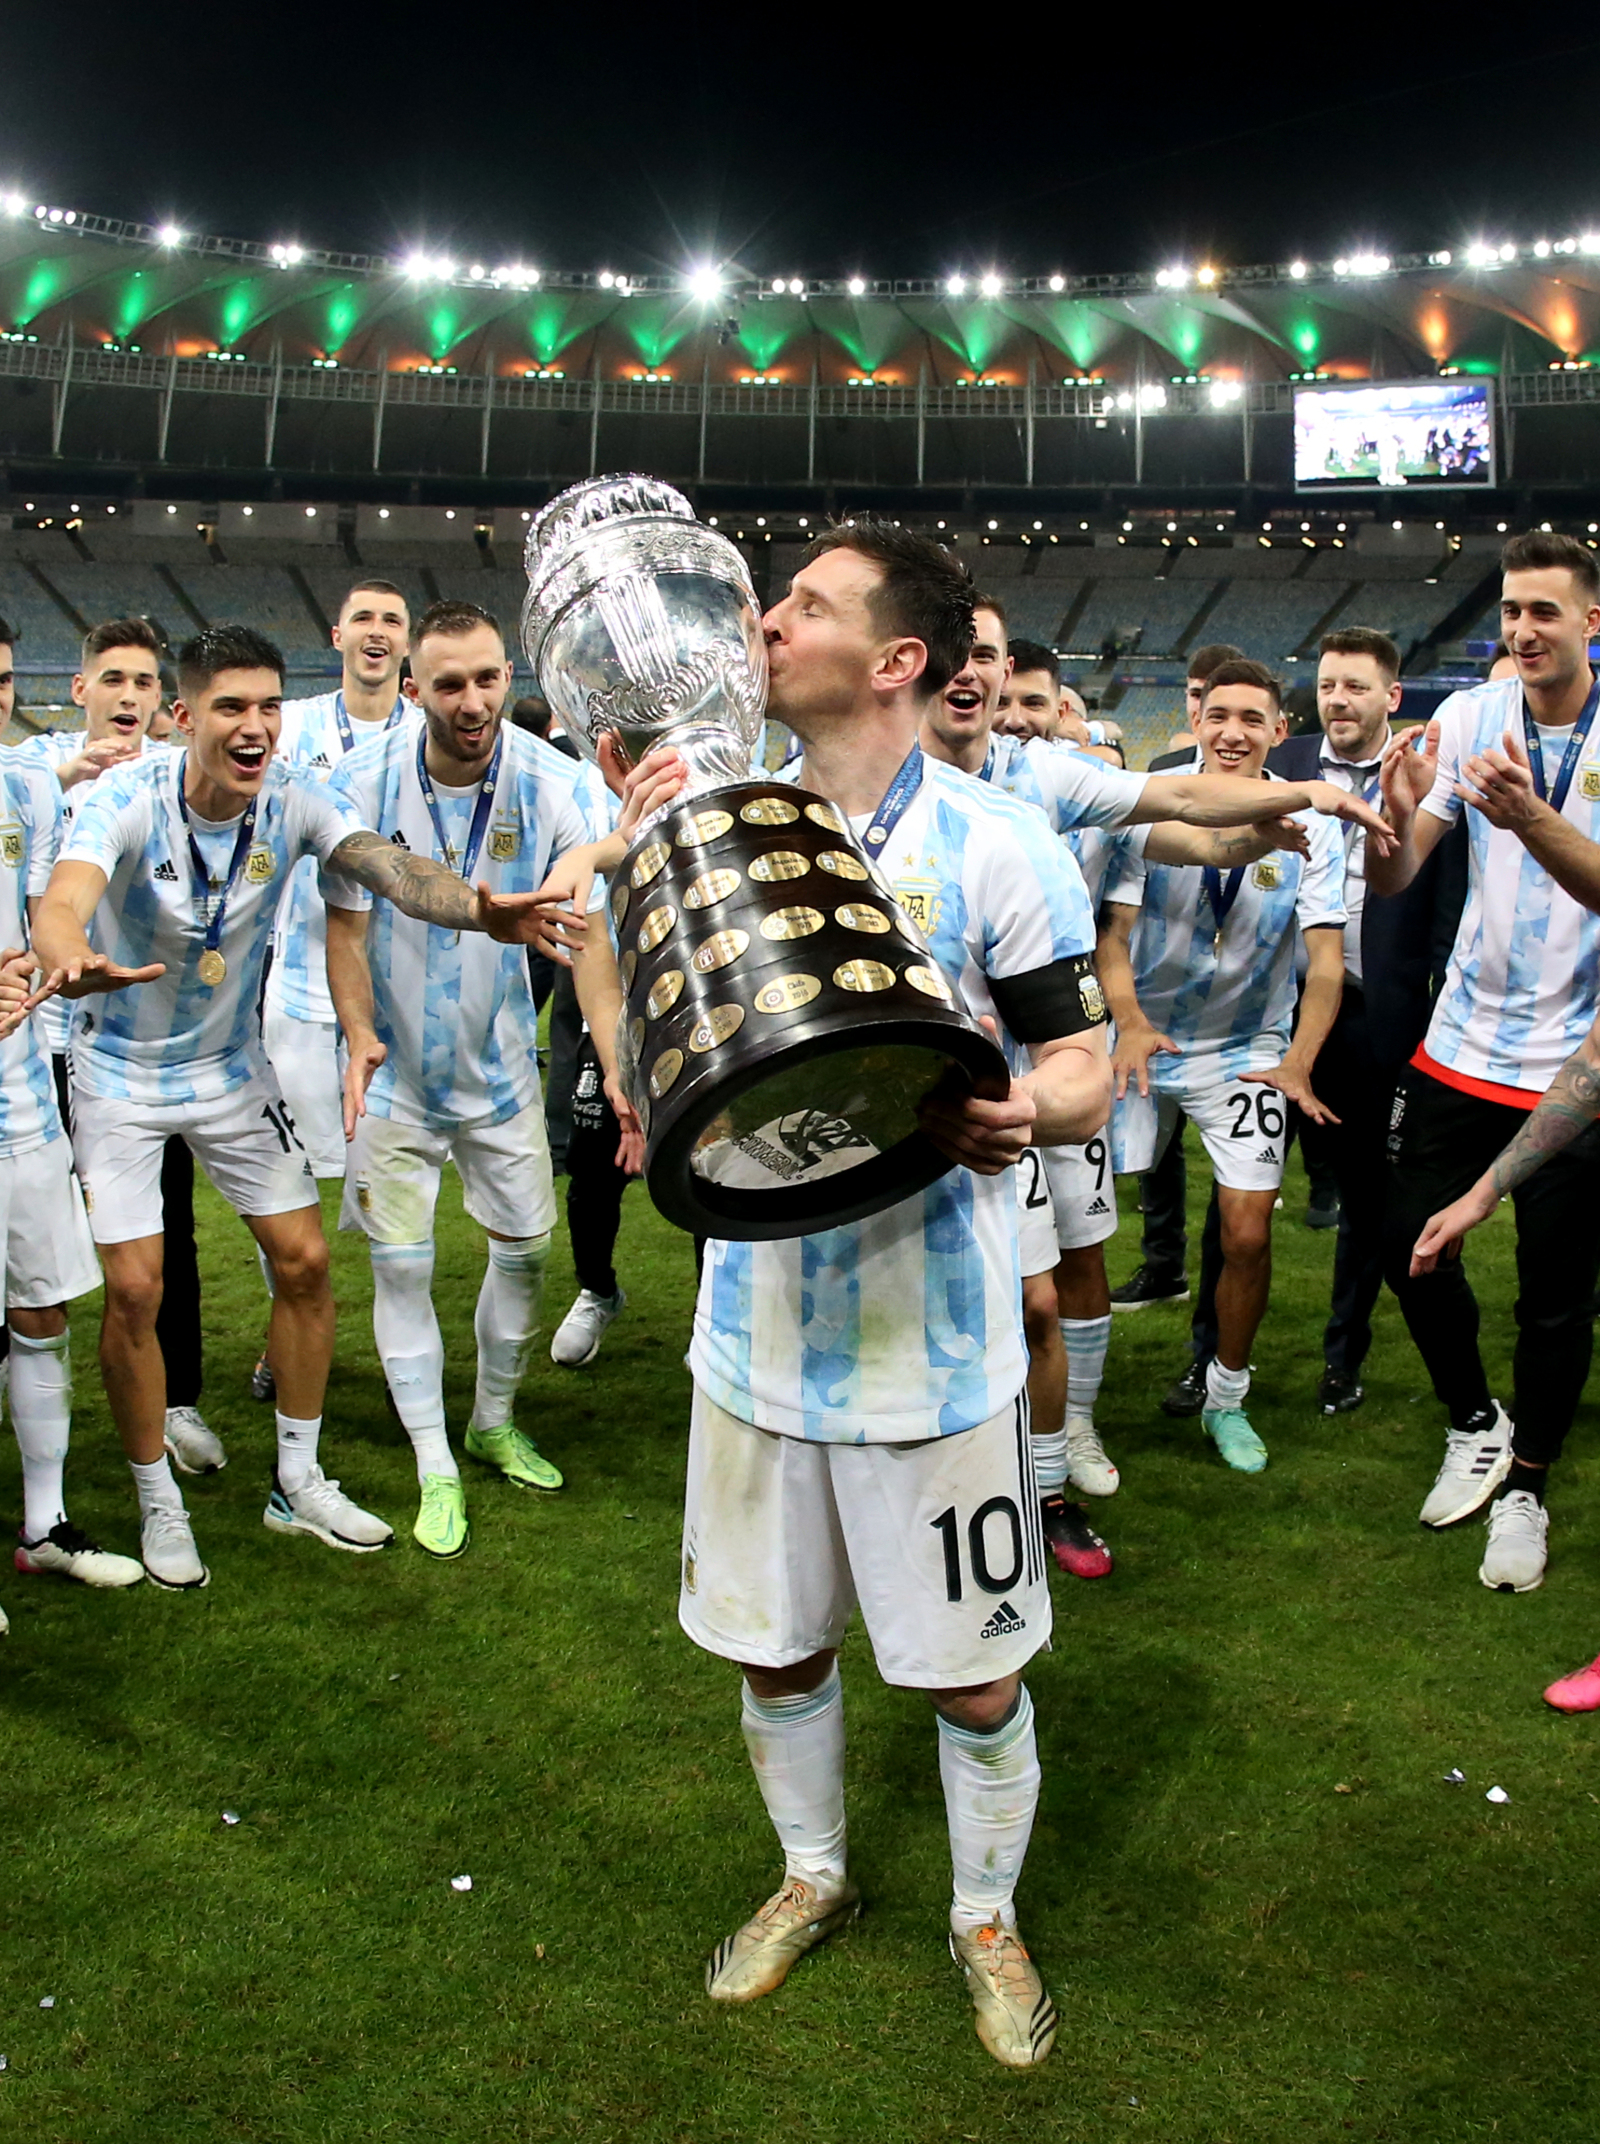 𝗕𝗟𝗔𝗨𝗚𝗥𝗔𝗡𝗔 en Instagram Do you think Messi can win Copa America  this year  Messi Lionel messi Leo messi